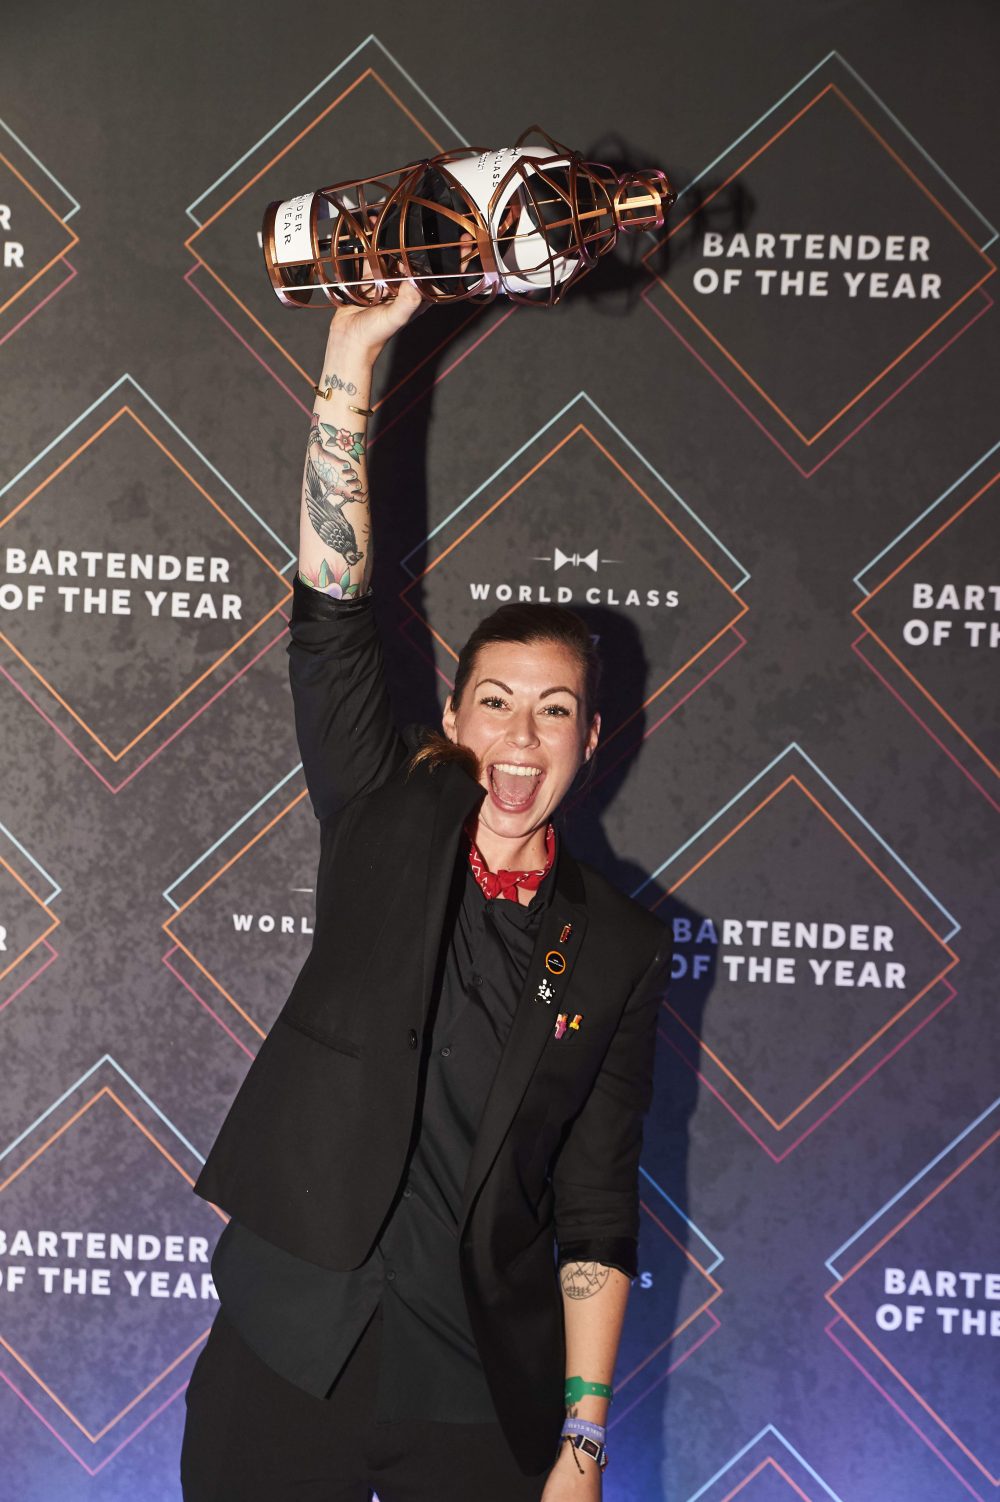 Kaitlyn Stewart is named the World Class Bartender of the Year in a glistening awards ceremony in Mexico City 2017